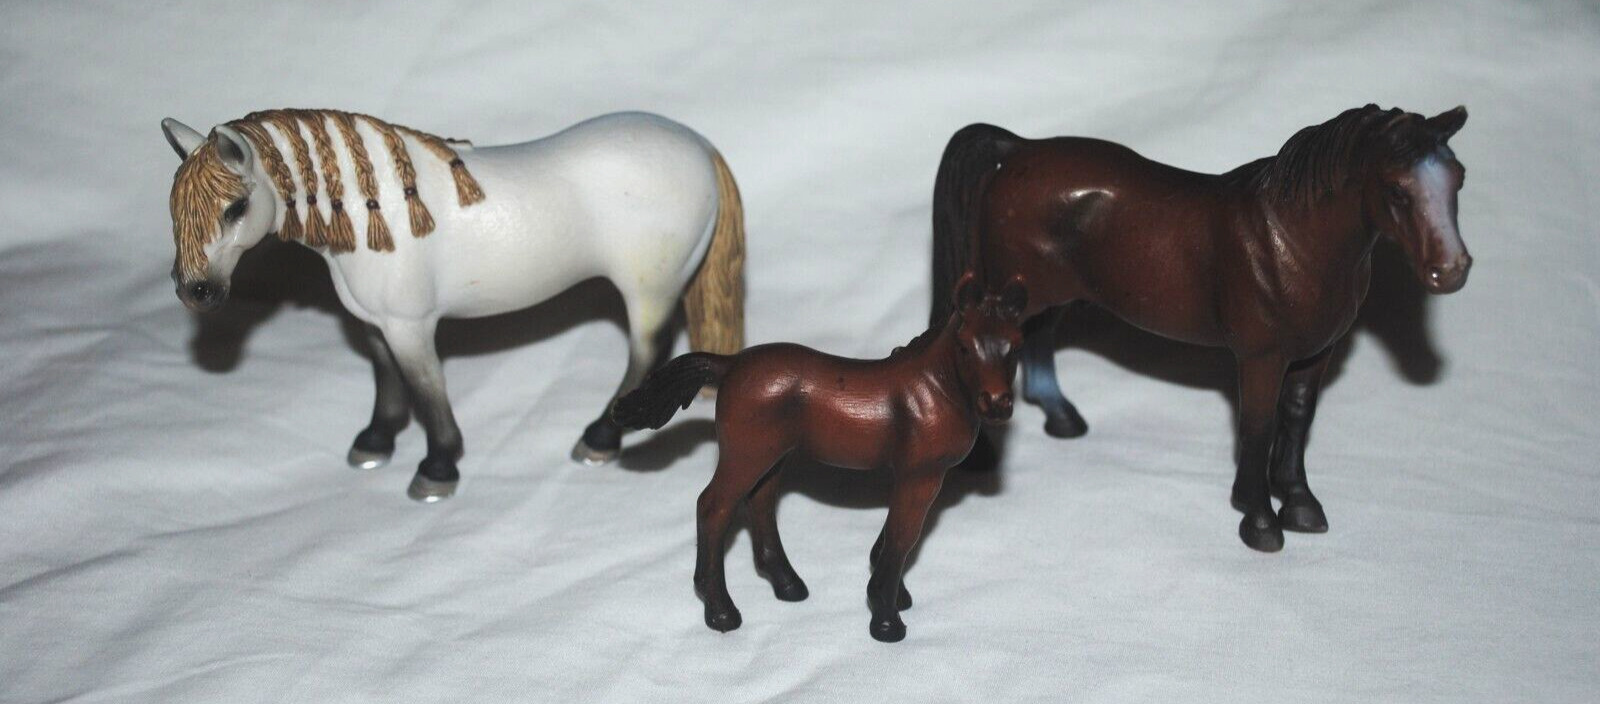 Schleich small plastic horse figures lot, Germany, LOT OF 3